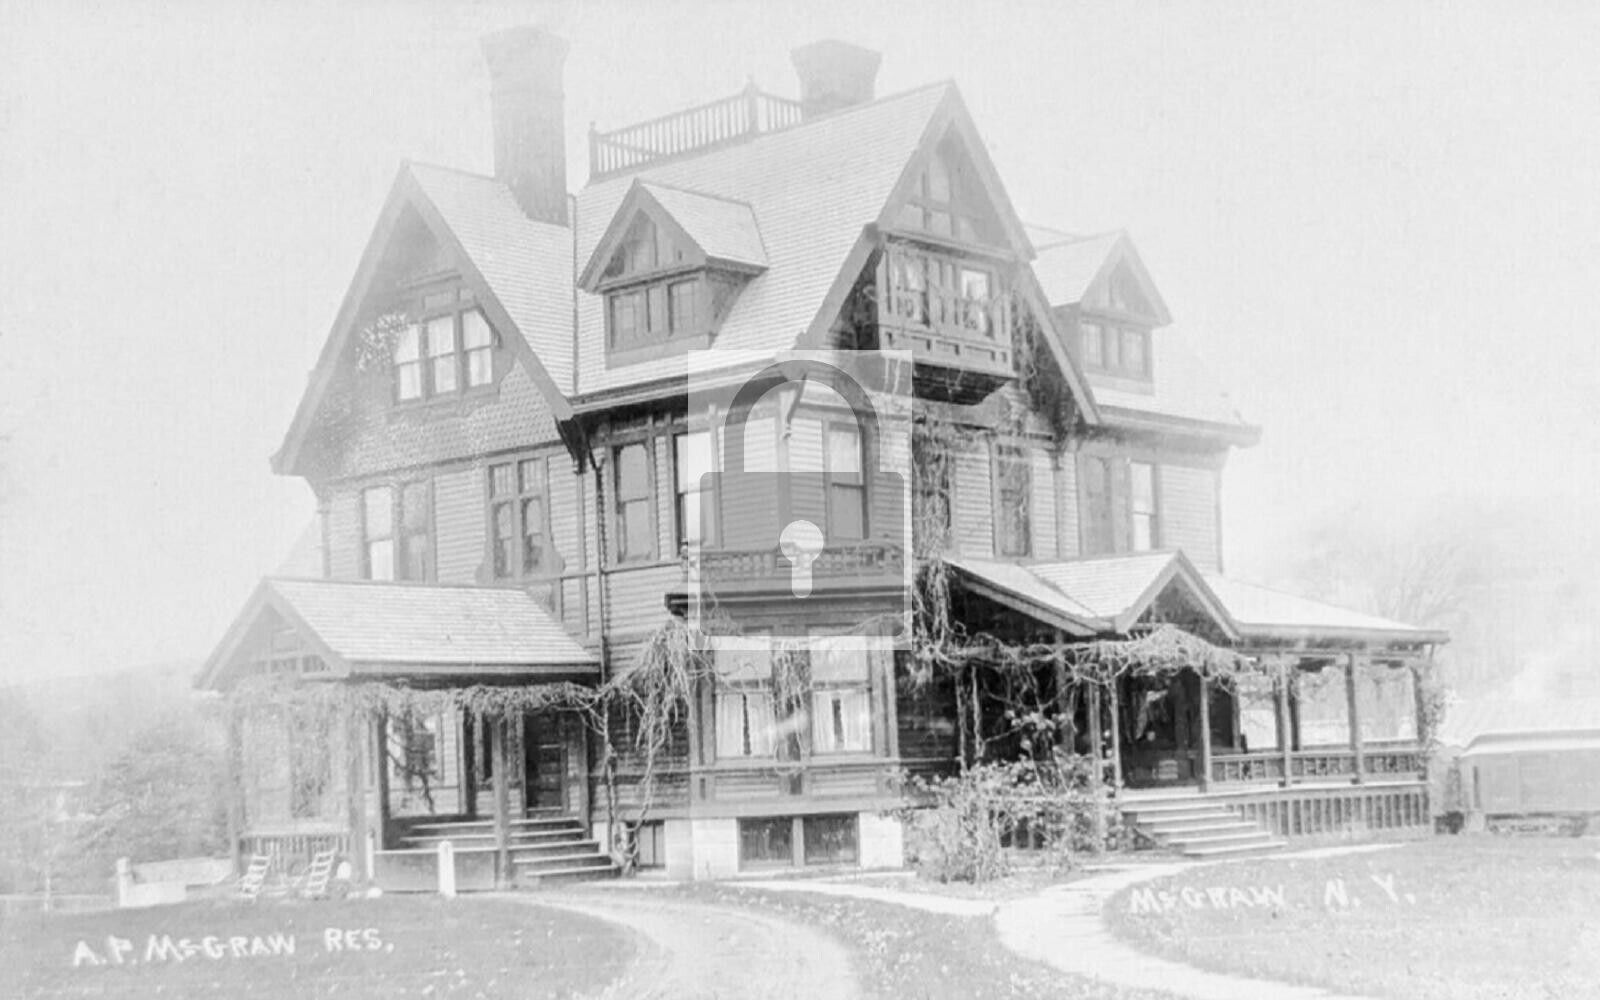 A P McGraw Residence House McGraw New York NY - 8x10 Reprint